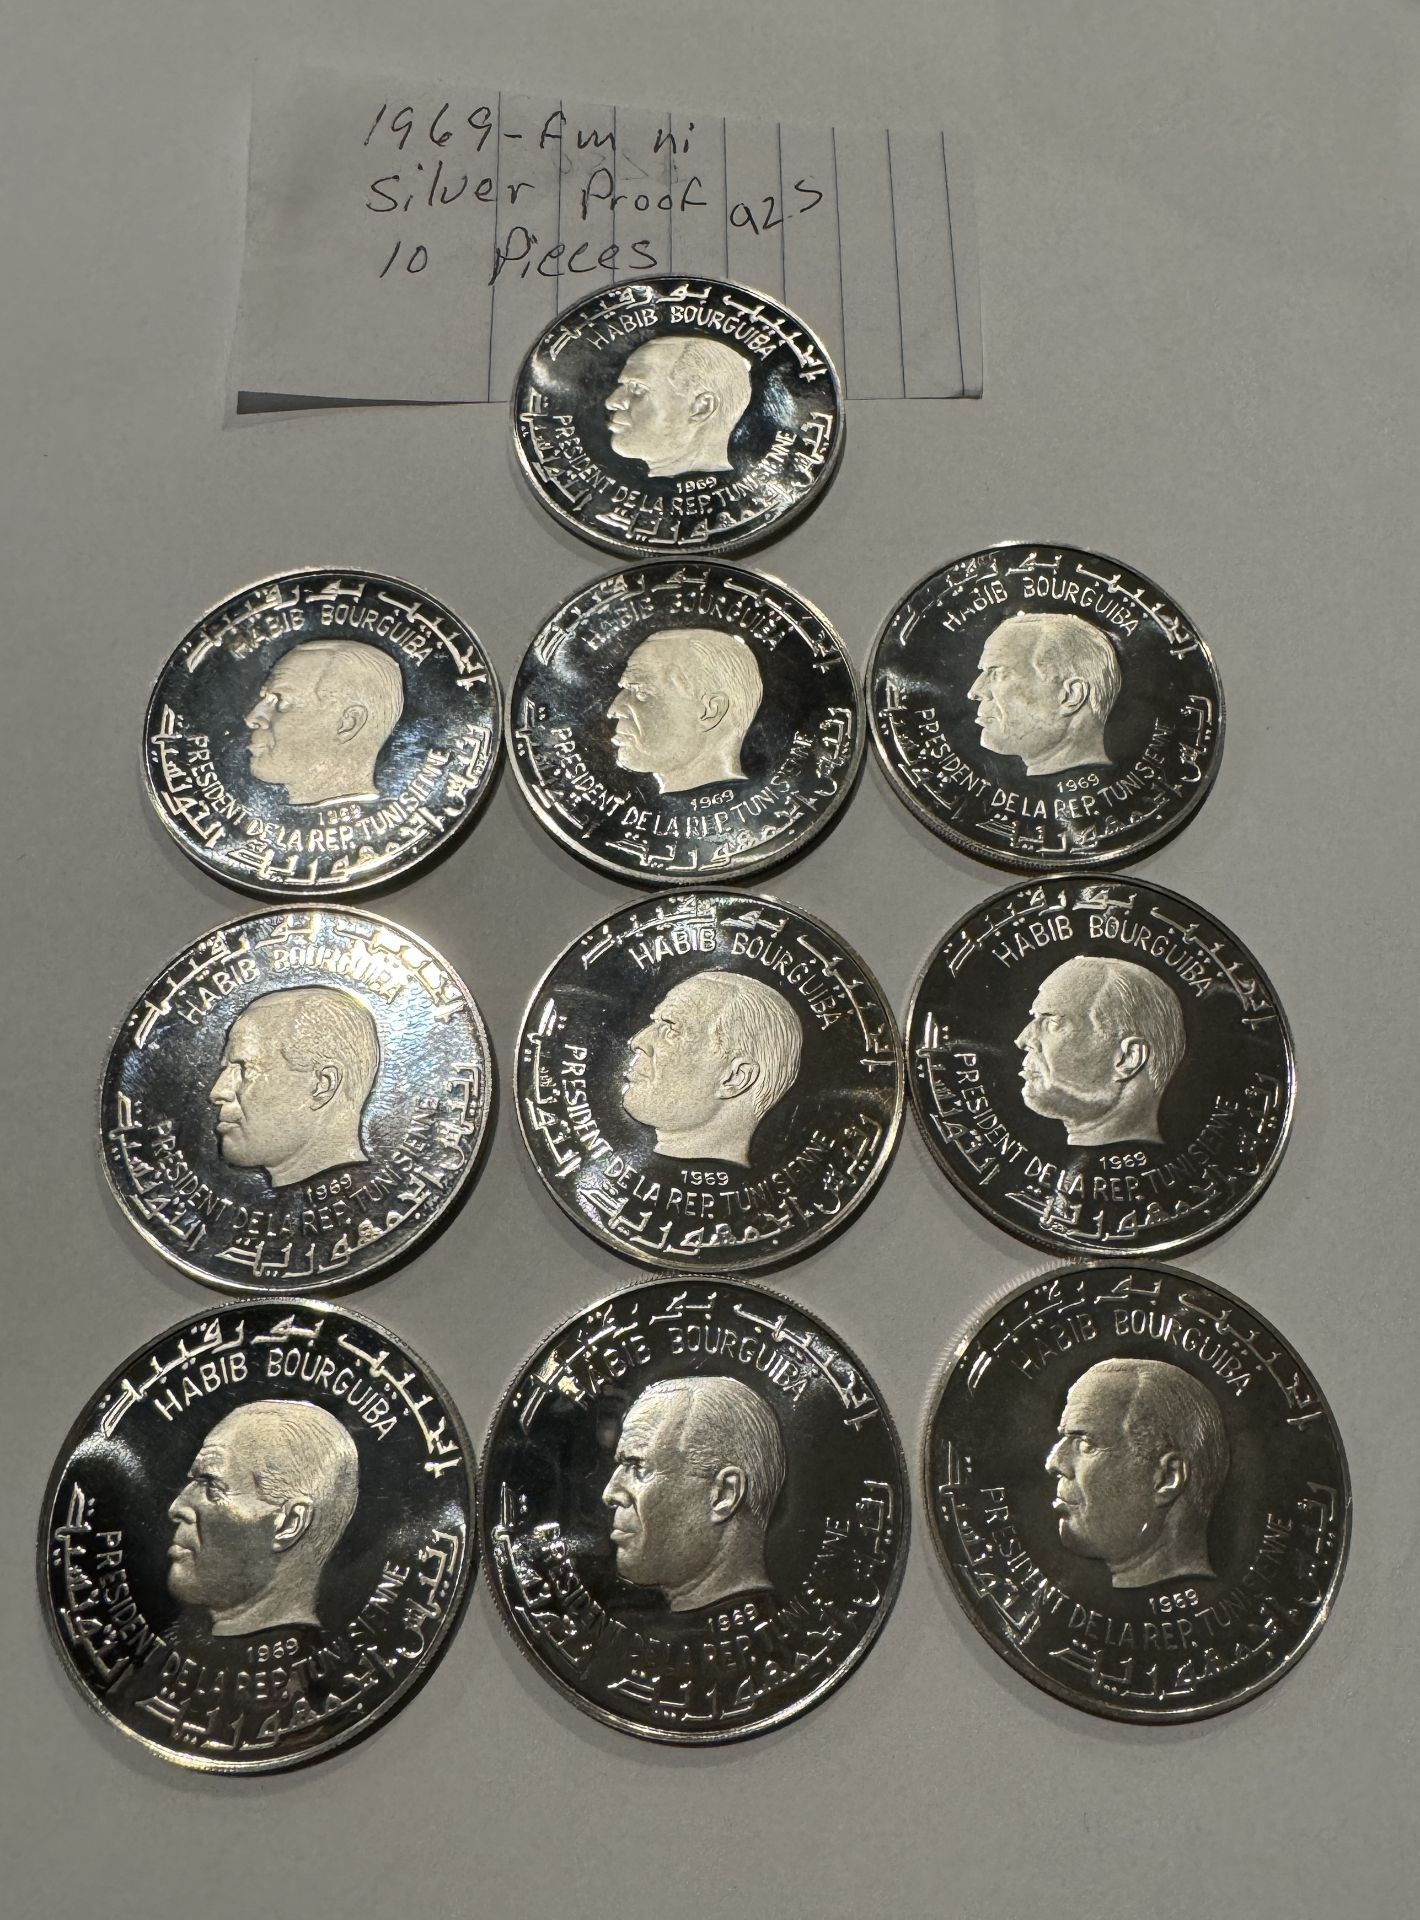 1969-FM SILVER 925 10 PIECE COIN SET - Image 3 of 3